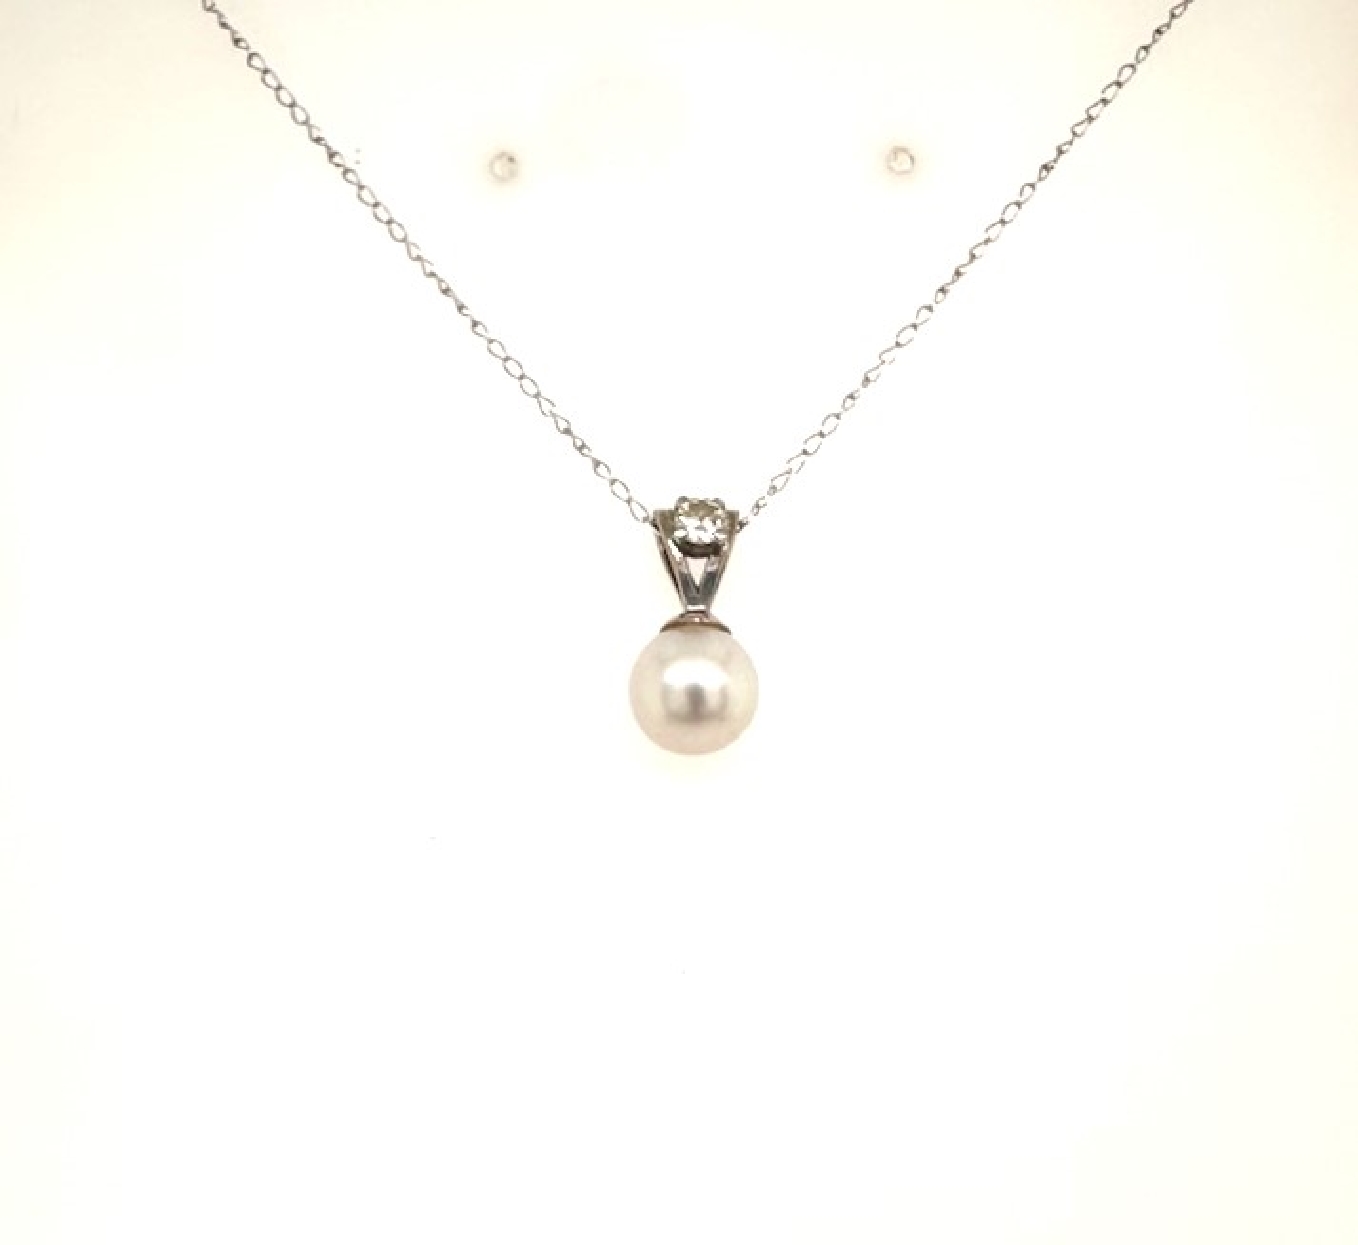 14K White Gold Pearl Drop Pendant with Diamond Accent on 18 Inch Chain